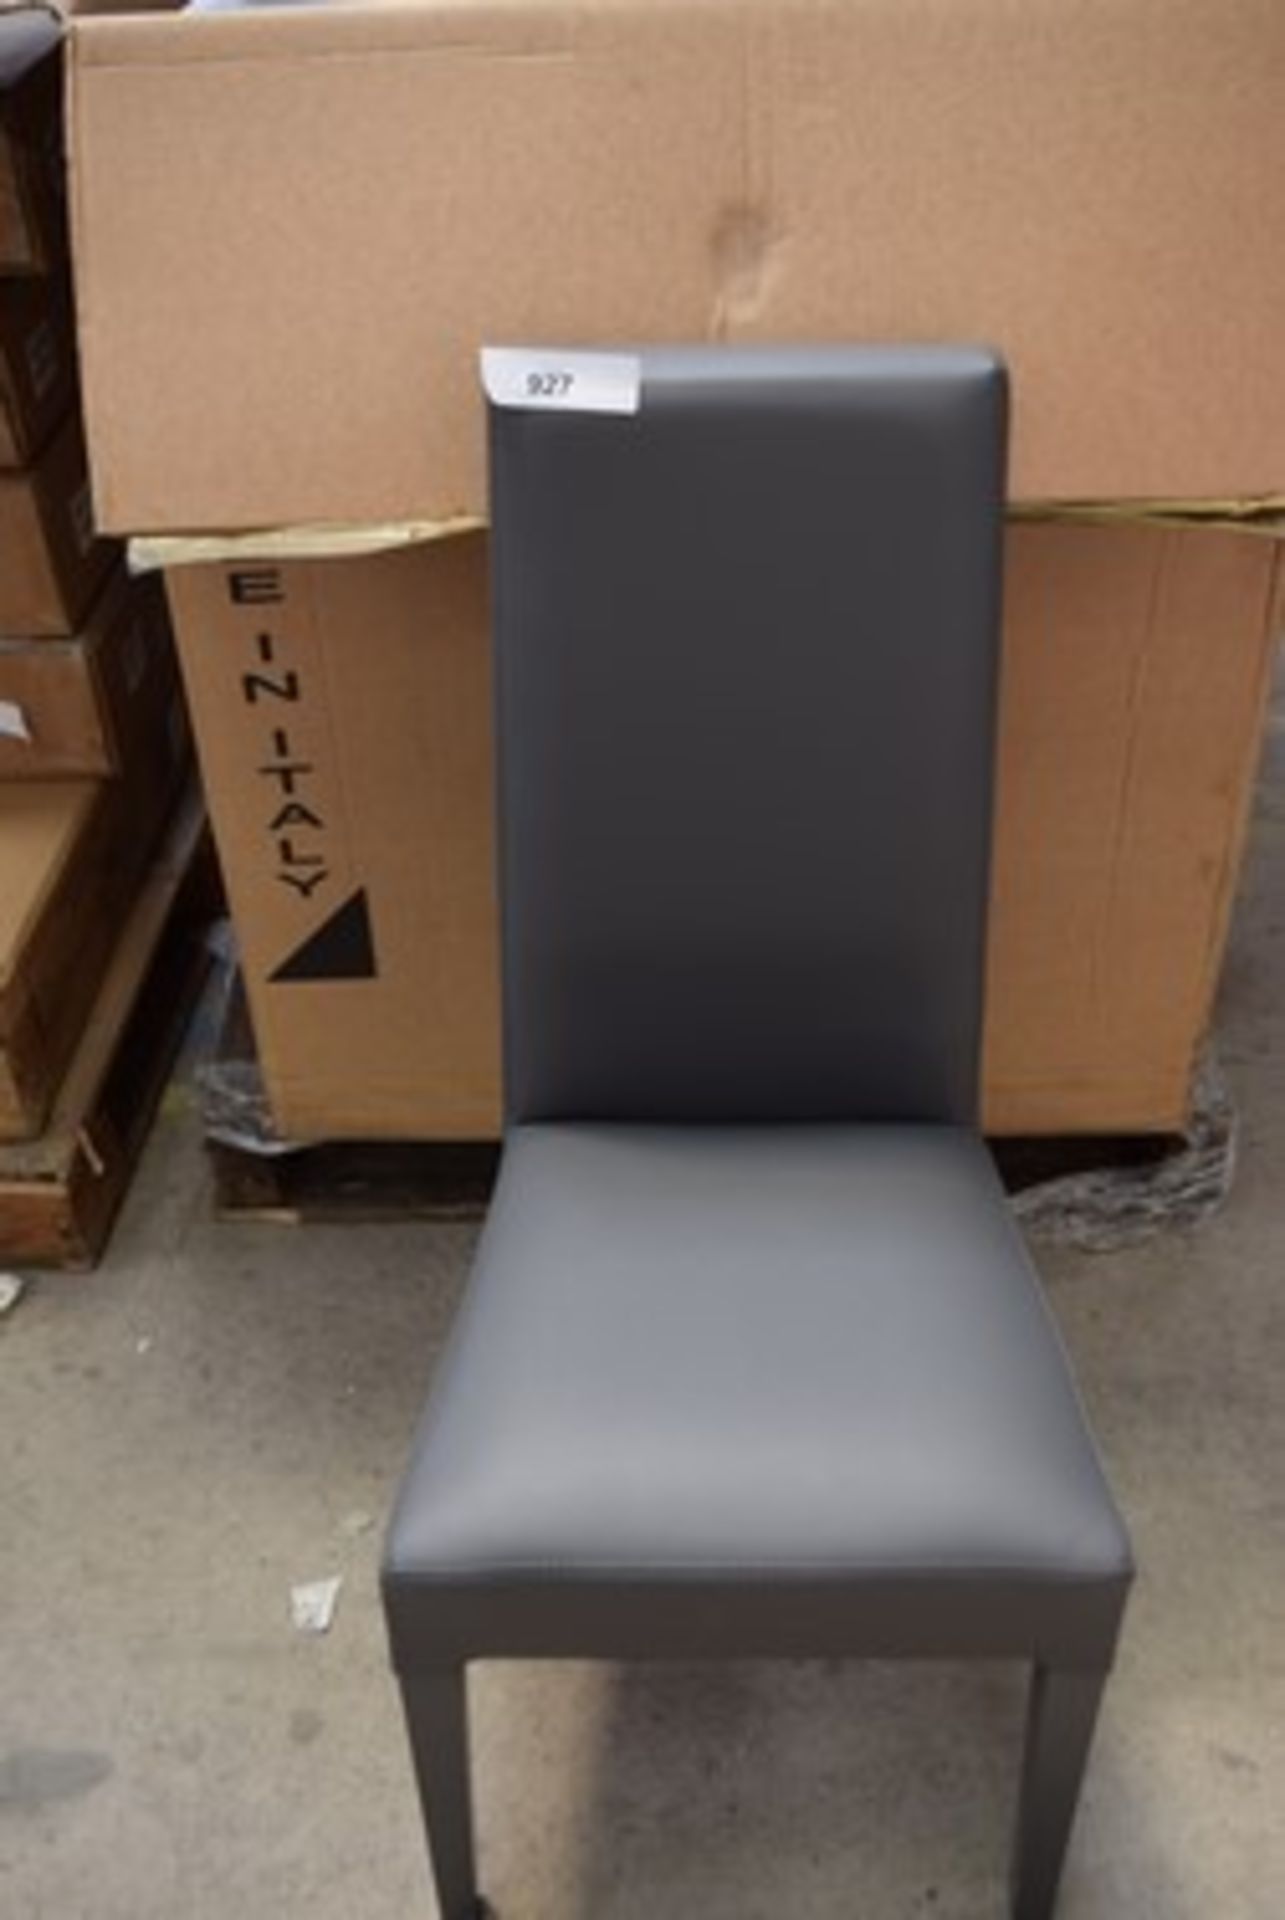 4 x Tommy chairs - (dining/kitchen) upholstered in eco dark grey leather, with wooden legs - painted